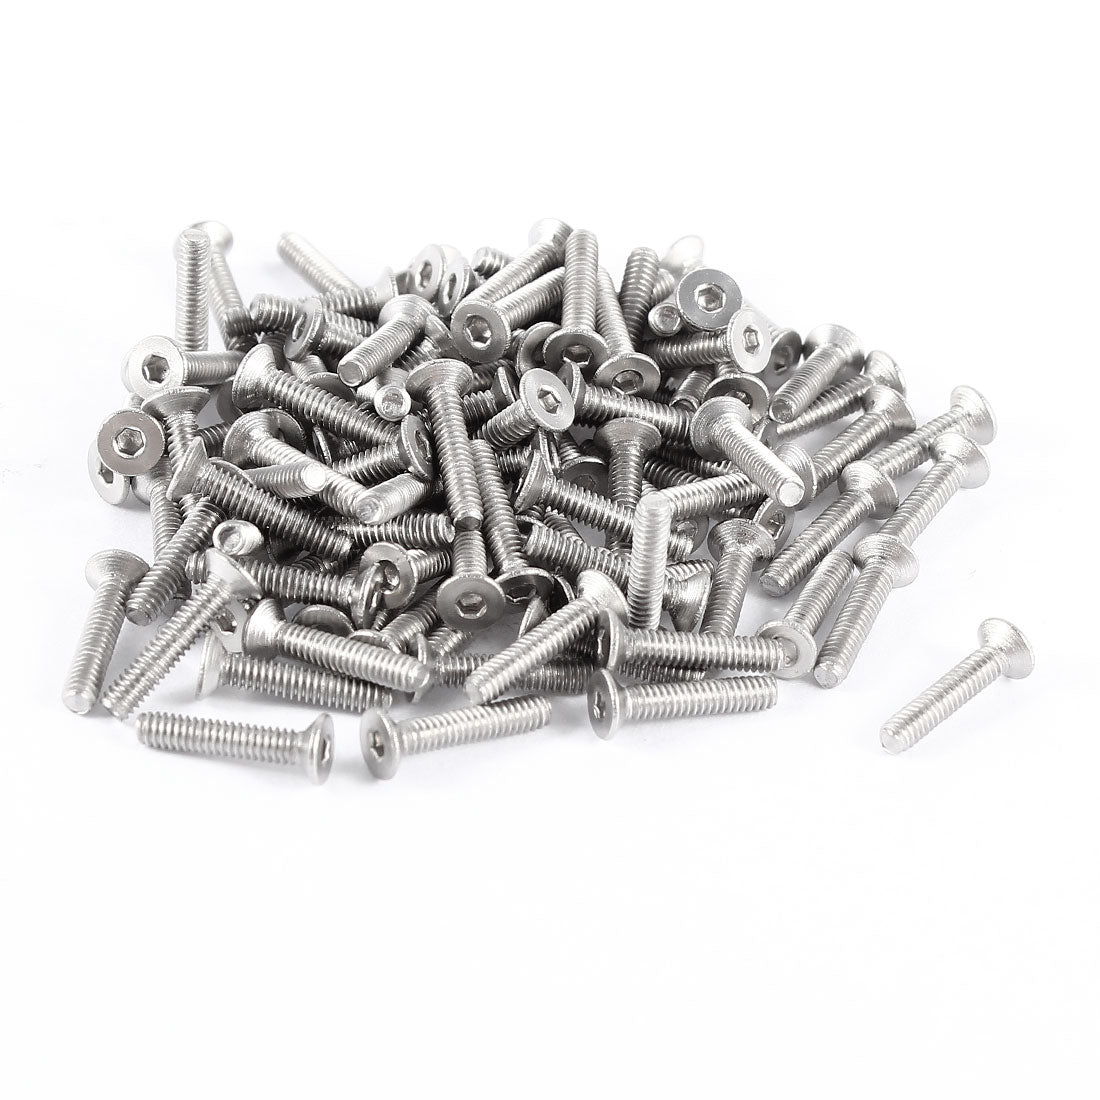 uxcell Uxcell 100 Pcs 304HC Stainless Steel Countersunk Socket Flat Head Bolt Screw M2.5x10mm Silver Tone